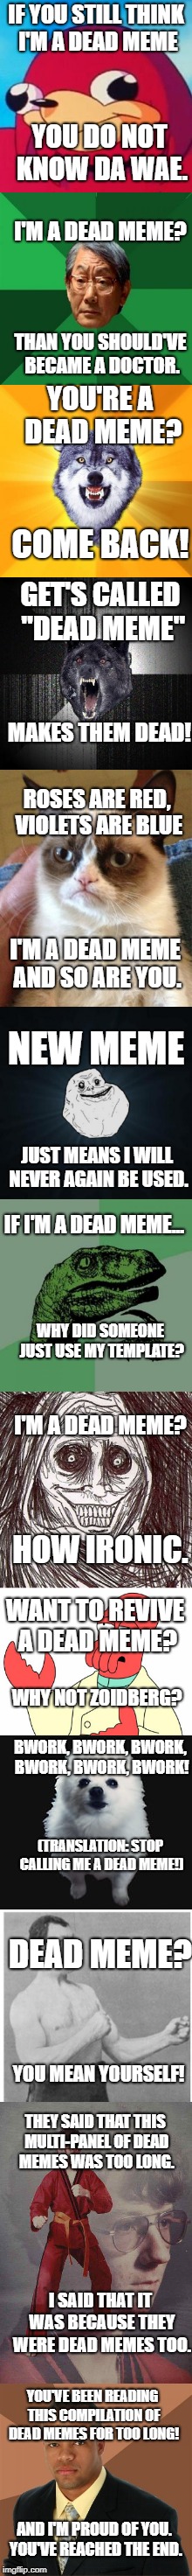 A Dead Multi-Panel Meme. | IF YOU STILL THINK I'M A DEAD MEME; YOU DO NOT KNOW DA WAE. I'M A DEAD MEME? THAN YOU SHOULD'VE BECAME A DOCTOR. YOU'RE A DEAD MEME? COME BACK! GET'S CALLED "DEAD MEME"; MAKES THEM DEAD! ROSES ARE RED, VIOLETS ARE BLUE; I'M A DEAD MEME AND SO ARE YOU. NEW MEME; JUST MEANS I WILL NEVER AGAIN BE USED. IF I'M A DEAD MEME... WHY DID SOMEONE JUST USE MY TEMPLATE? I'M A DEAD MEME? HOW IRONIC. WANT TO REVIVE A DEAD MEME? WHY NOT ZOIDBERG? BWORK, BWORK, BWORK, BWORK, BWORK, BWORK! (TRANSLATION: STOP CALLING ME A DEAD MEME!); DEAD MEME? YOU MEAN YOURSELF! THEY SAID THAT THIS MULTI-PANEL OF DEAD MEMES WAS TOO LONG. I SAID THAT IT WAS BECAUSE THEY WERE DEAD MEMES TOO. YOU'VE BEEN READING THIS COMPILATION OF DEAD MEMES FOR TOO LONG! AND I'M PROUD OF YOU. YOU'VE REACHED THE END. | image tagged in ugandan knuckles,high expectations asian father,courage wolf,insanity wolf,grumpy cat,etc | made w/ Imgflip meme maker